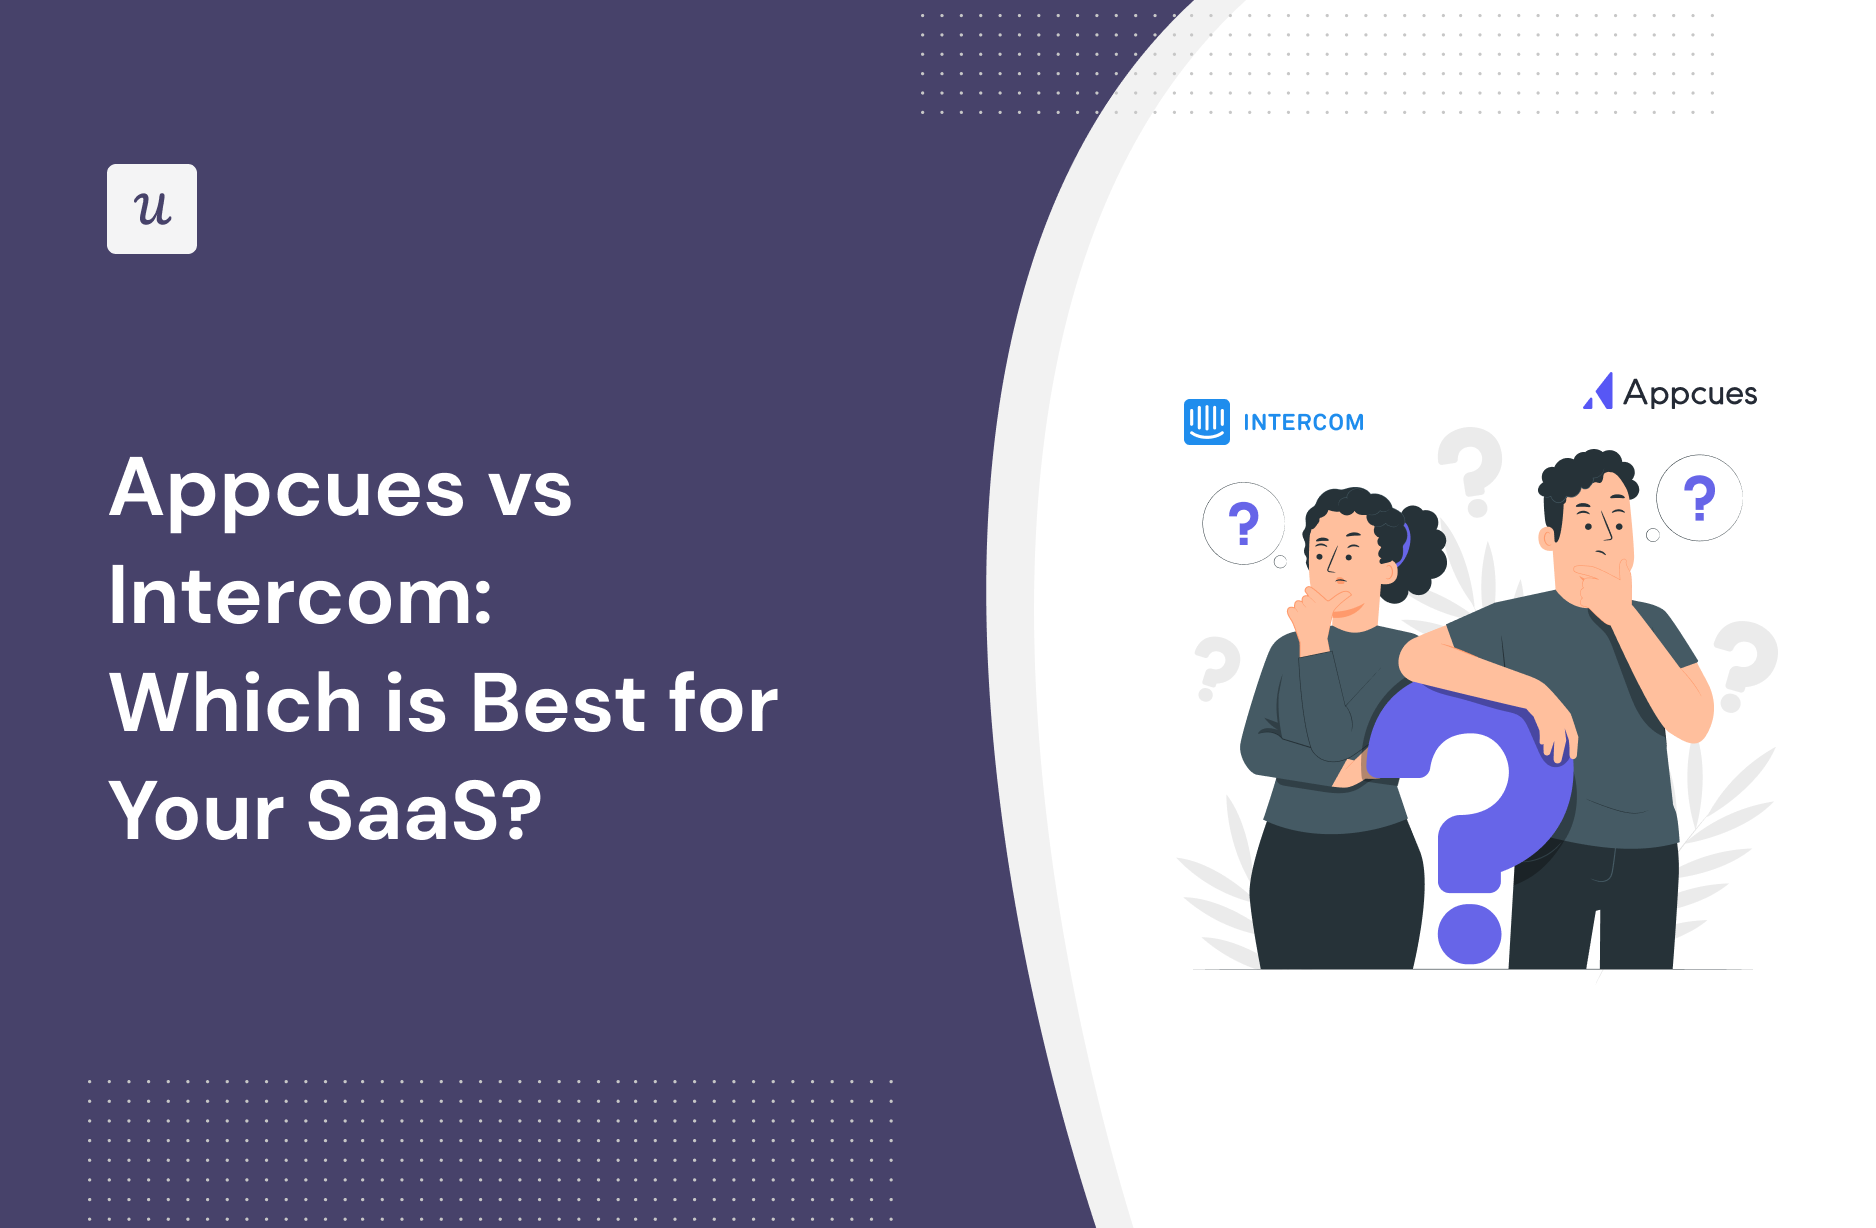 Appcues vs Intercom: Which is Best for Your SaaS?